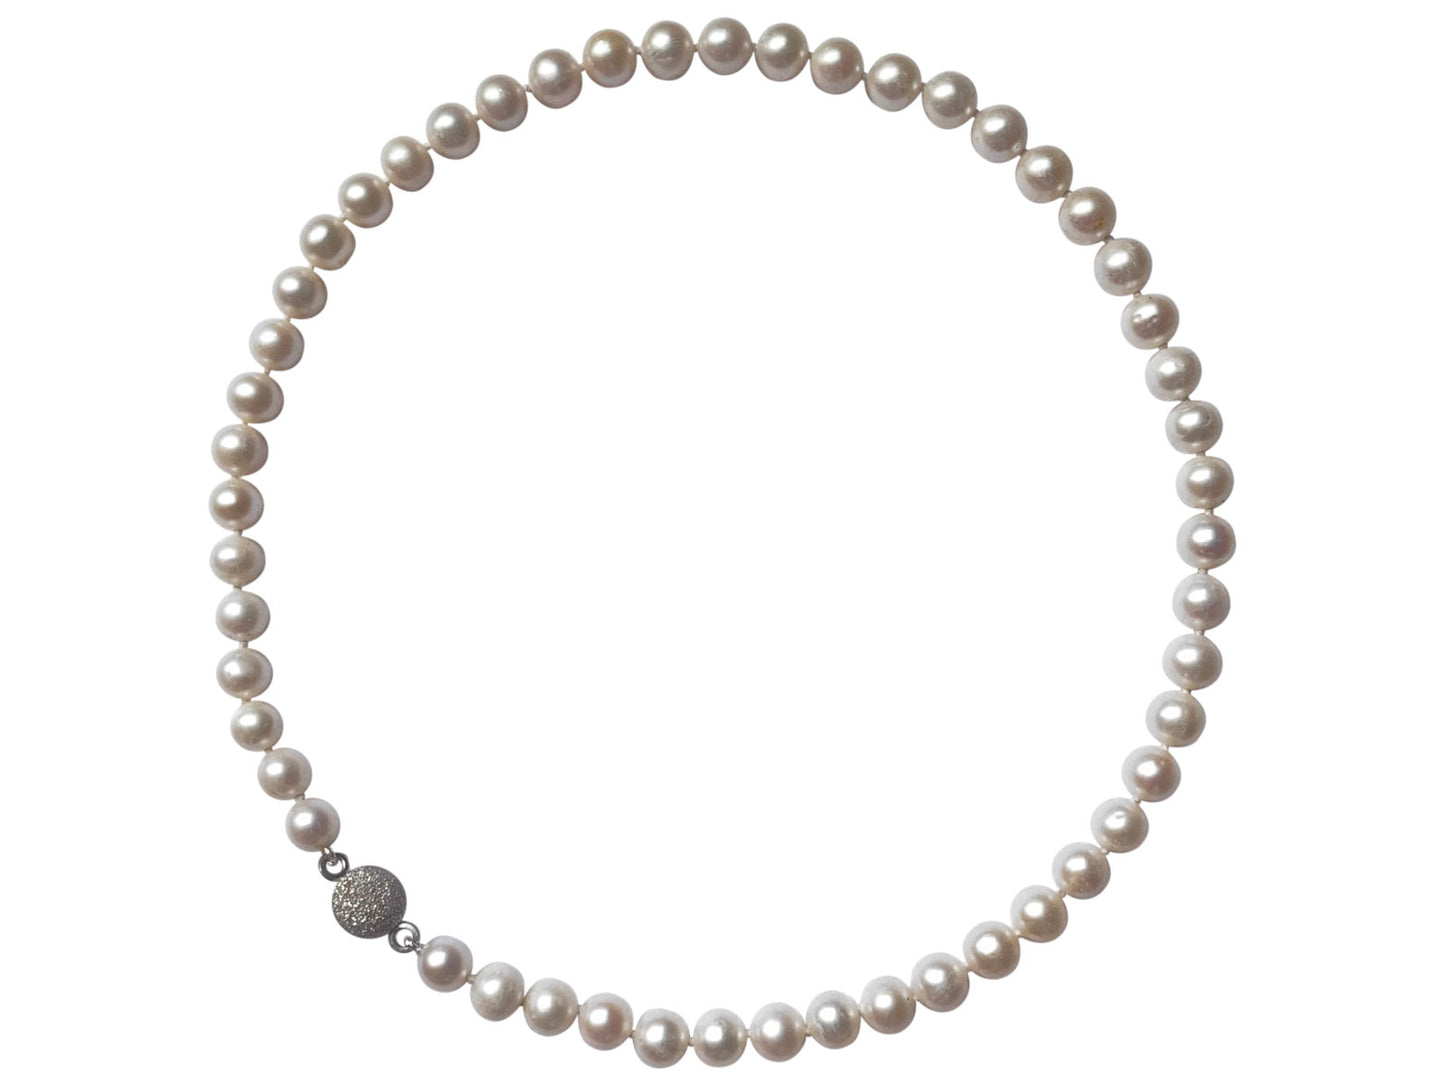 Freshwater Pearl Necklace 8-9mm On Sterling Silver Magnetic Clasp Side View of Clasp